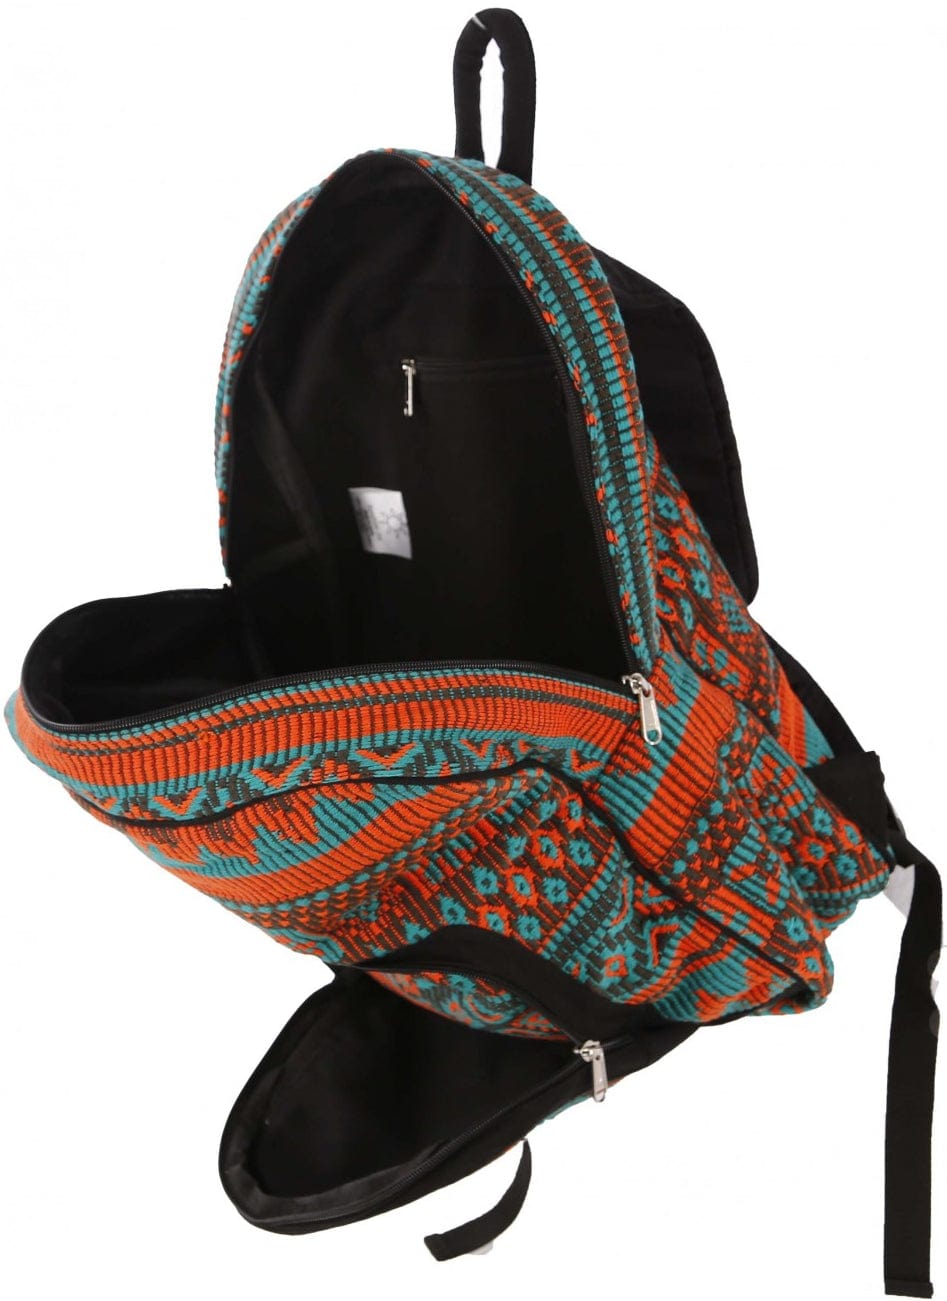 Bags Woven Jacquard - Turquoise and Orange - Backpack 102517